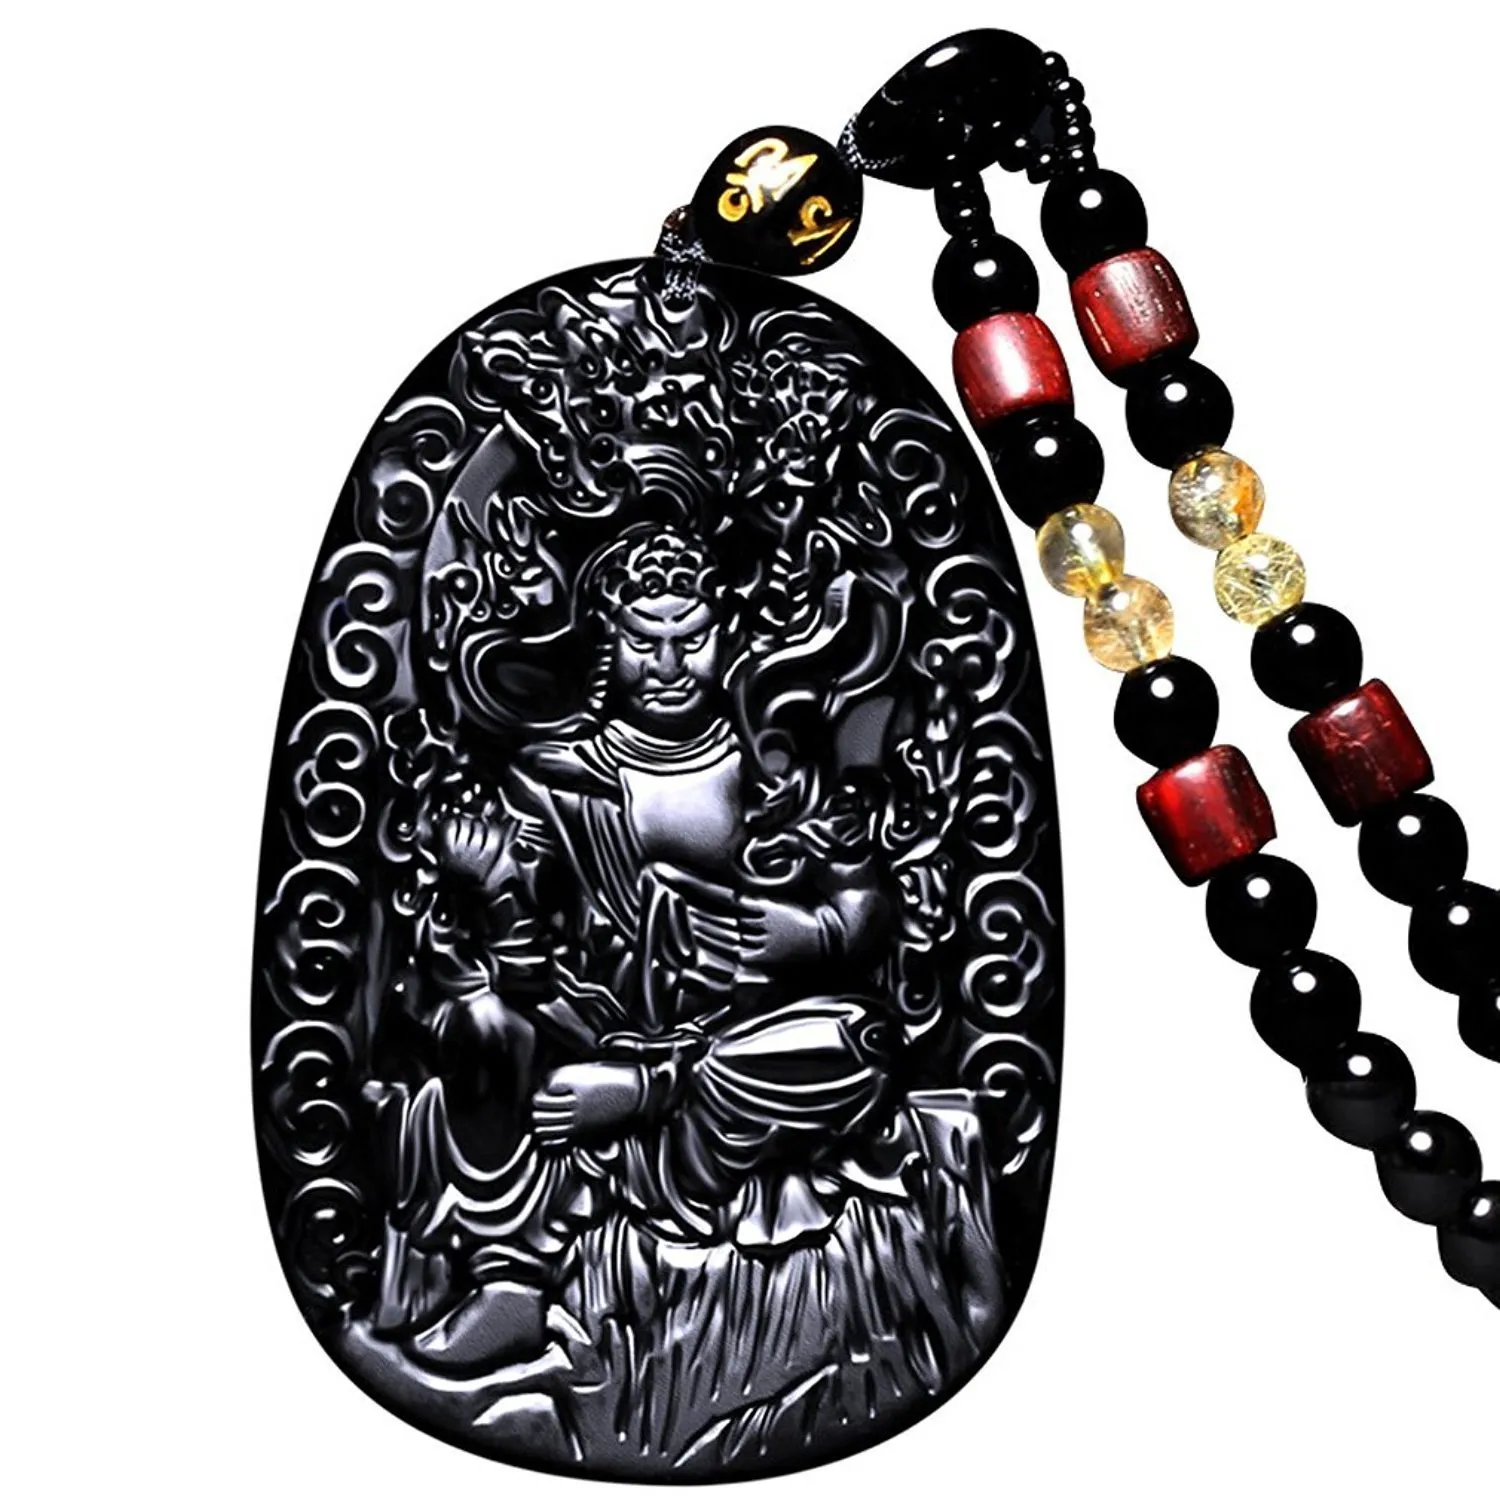 Fine Jewelry Pure Natural Obsidian Immovable Ming King Bodhisattva Acala Buddha Necklace Pendant Free Shipping